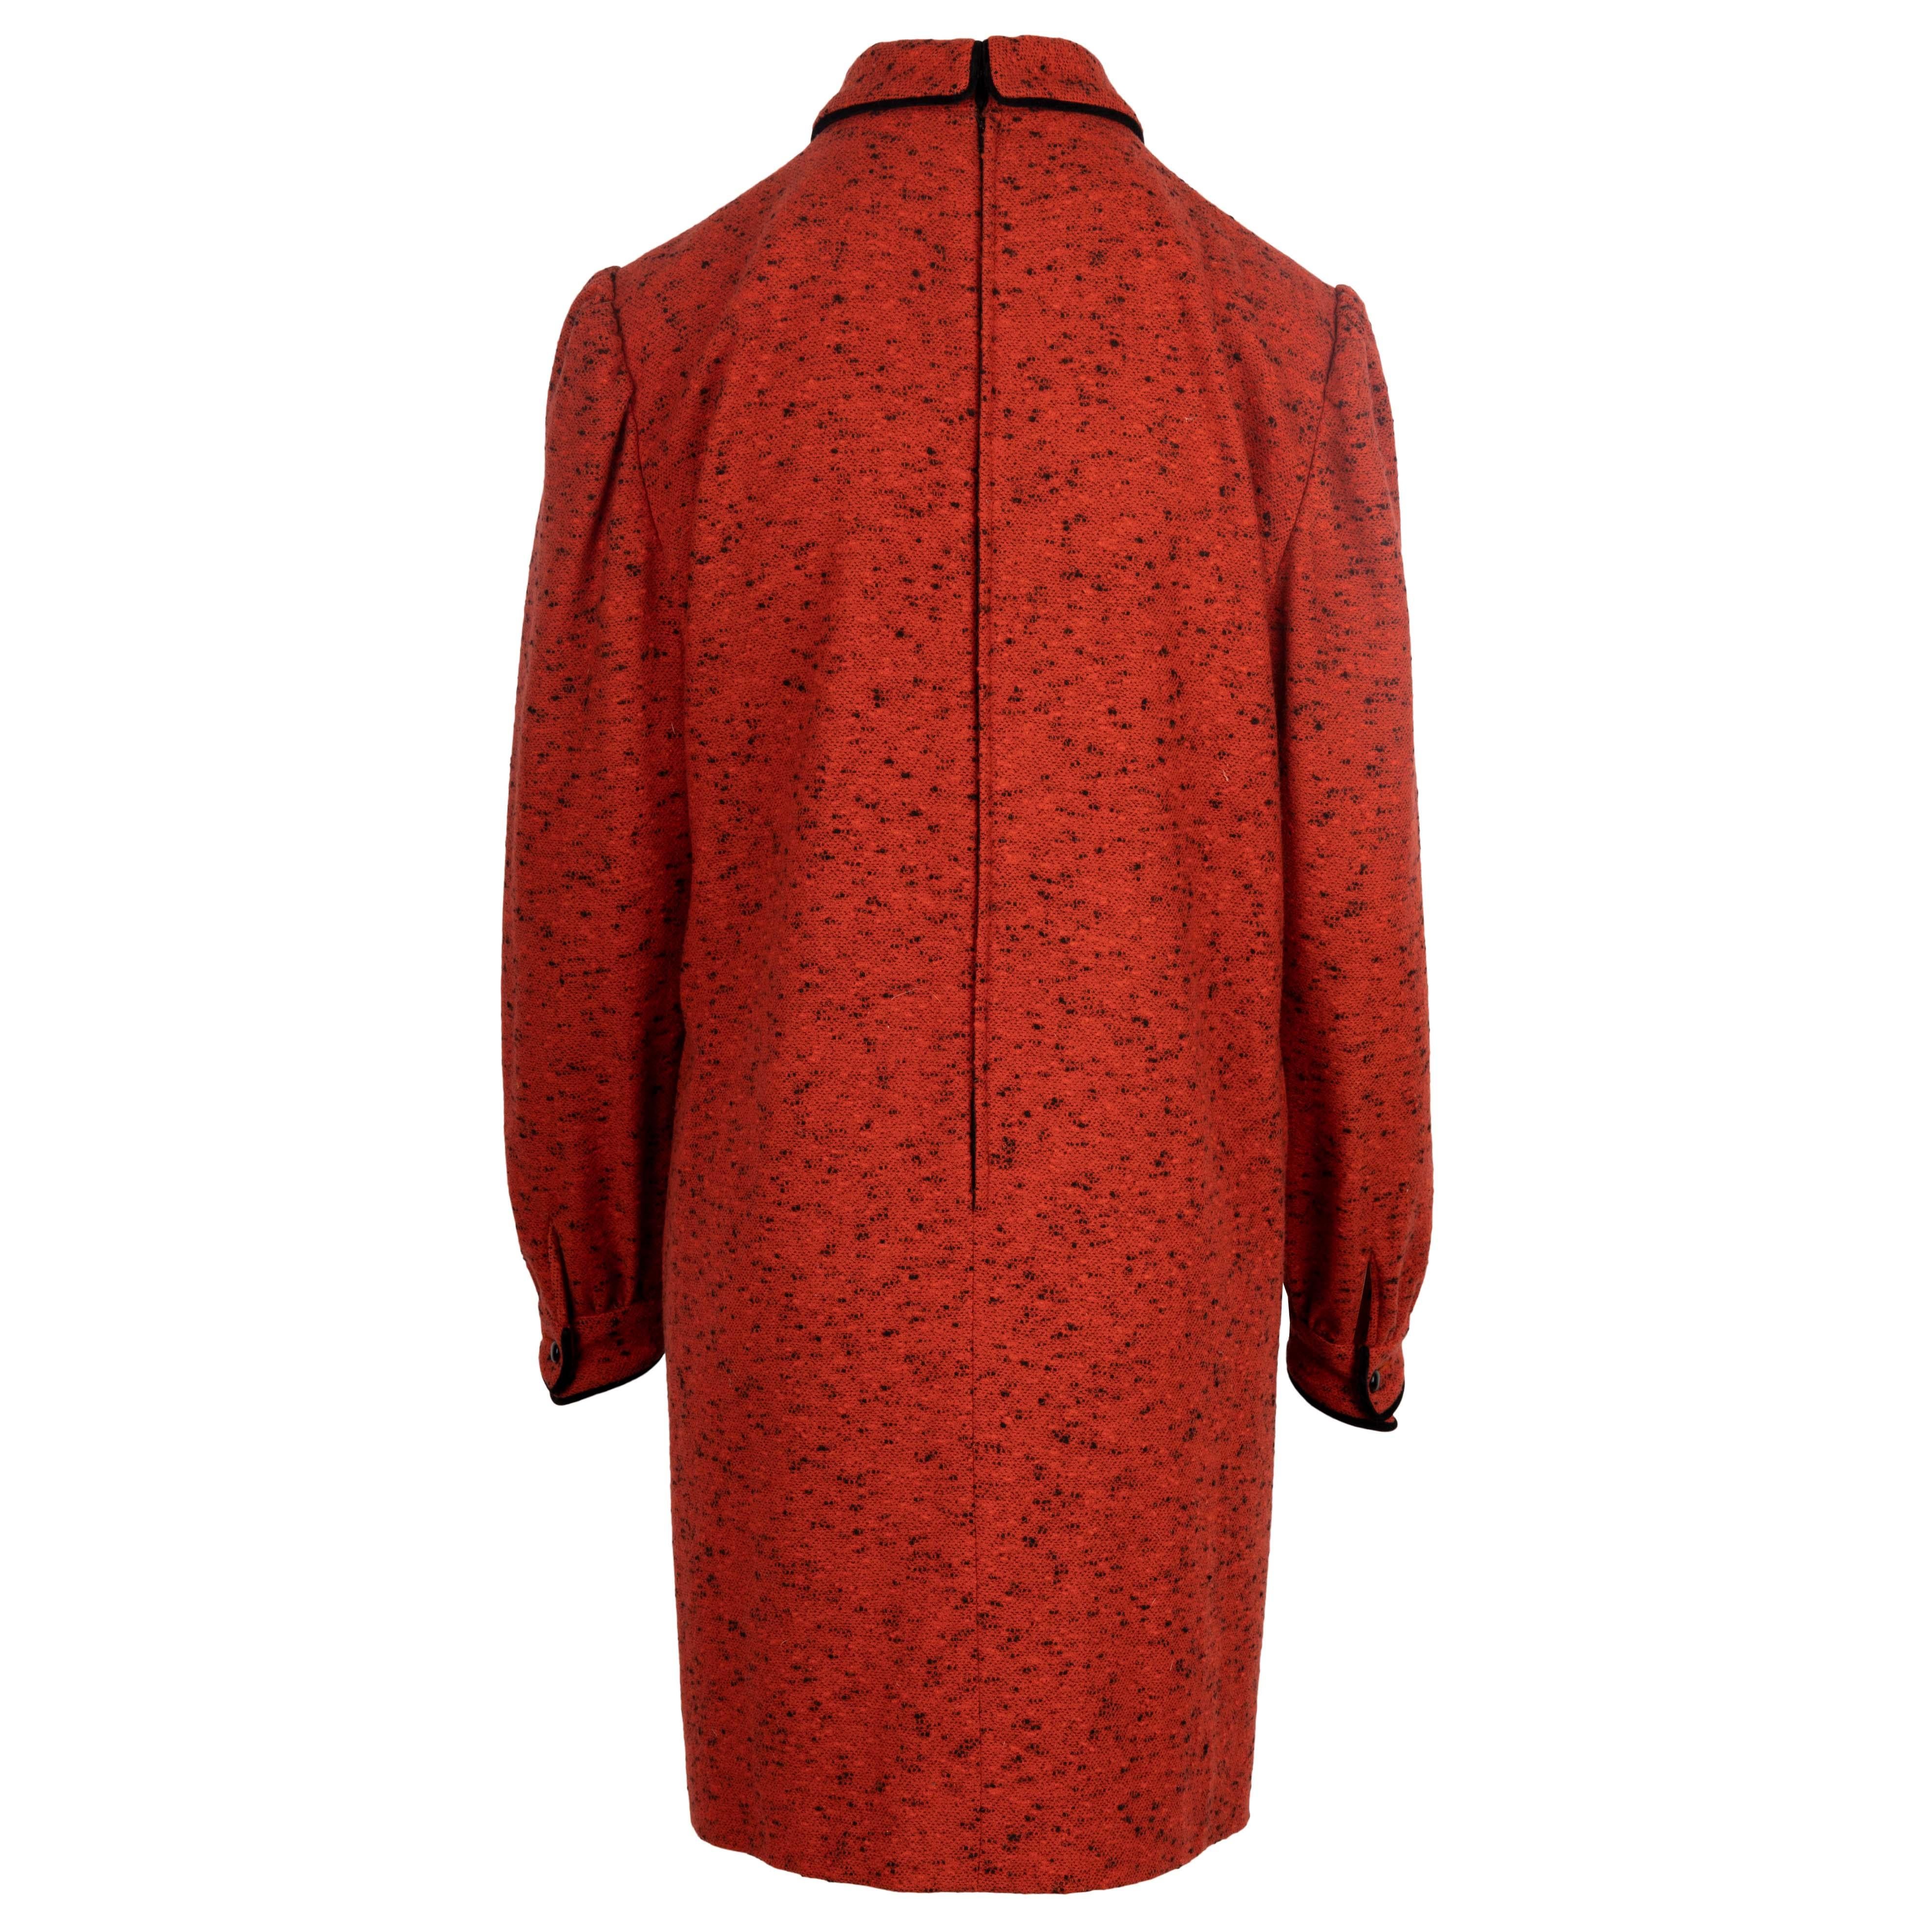 Crafted with red and black mélange wool, the Valentino red long-sleeve collar dress features a black velvet bow and cuffed sleeve with a small gathering at the shoulder and the cuff. The hook at the back of the collar creates ease in wearing the